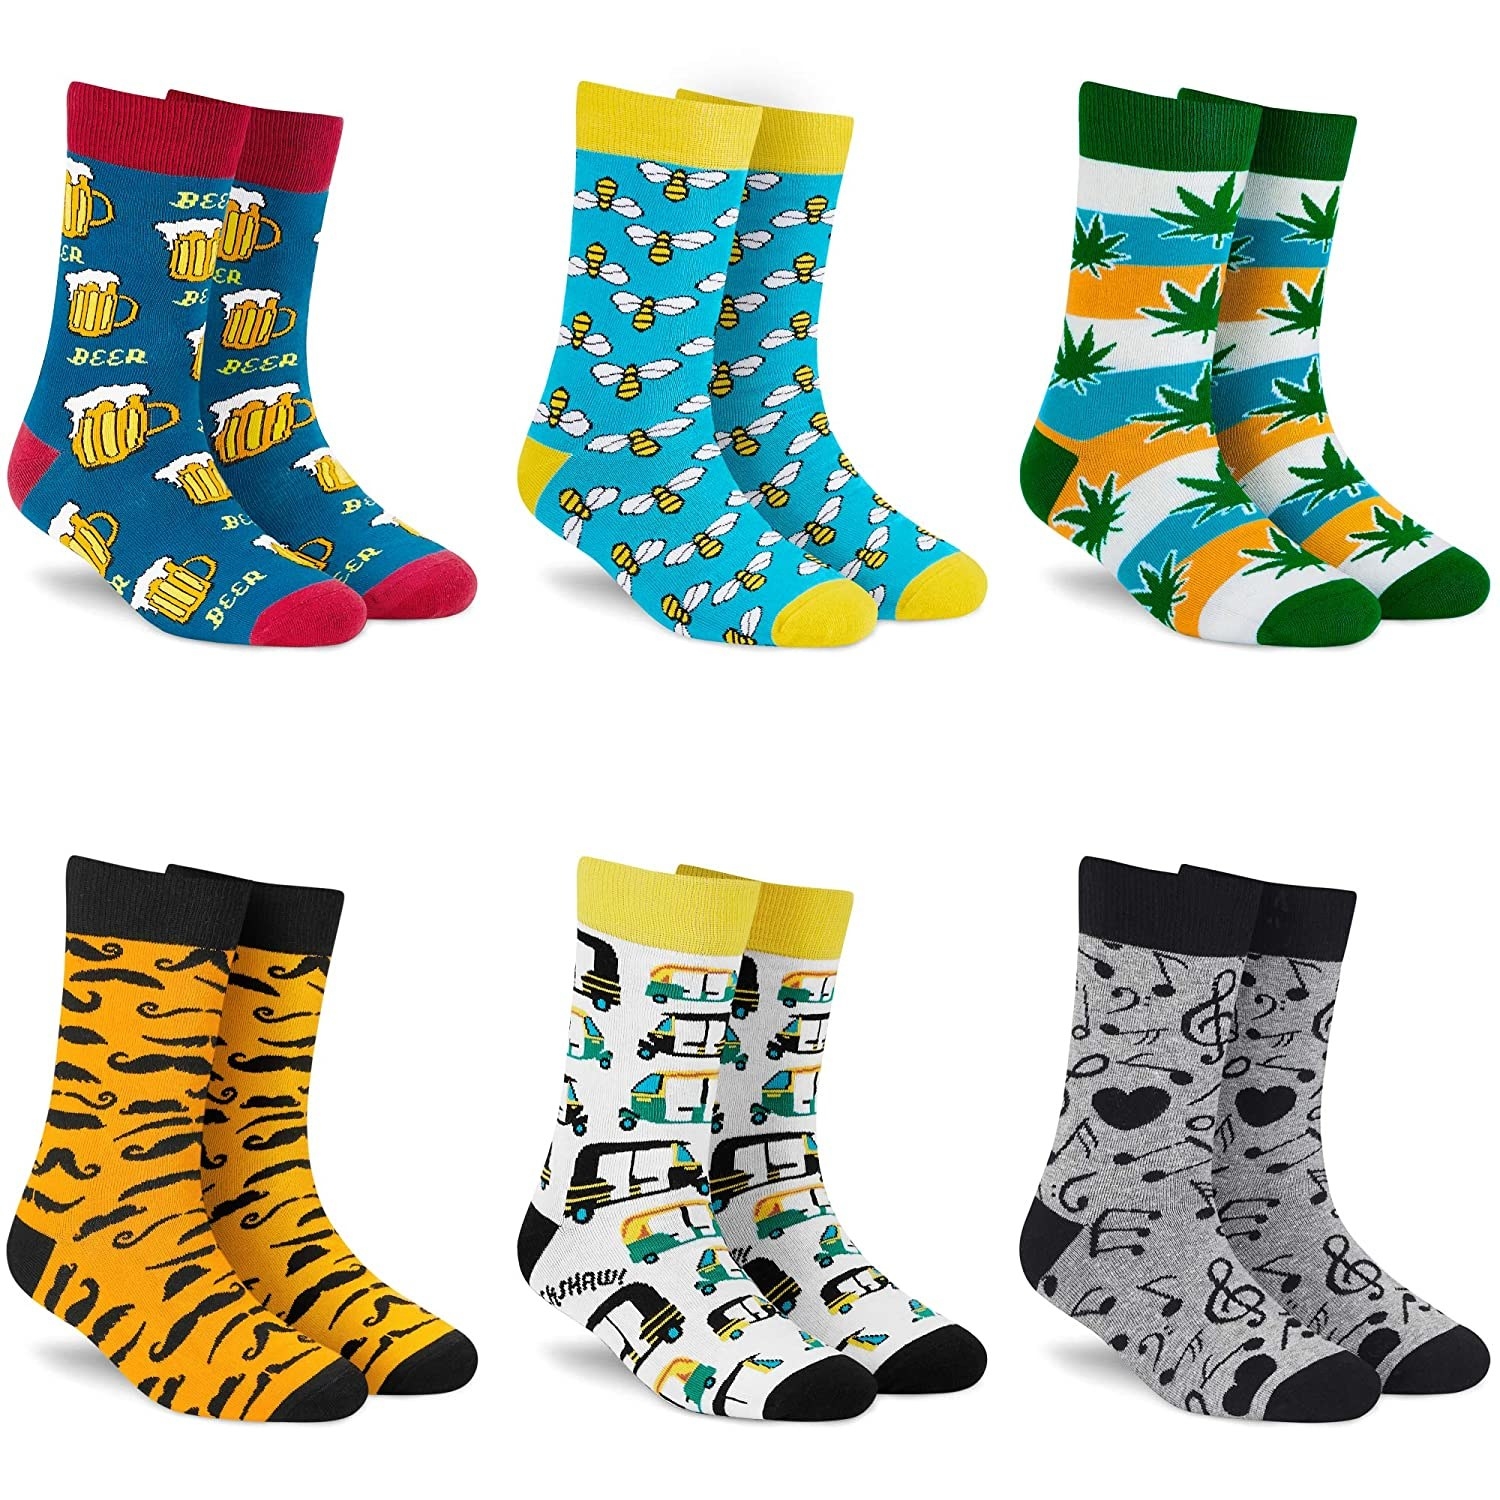 6 pairs of colourful socks with beer, bees, leaves, moustache, rickshaw, and musical notes prints